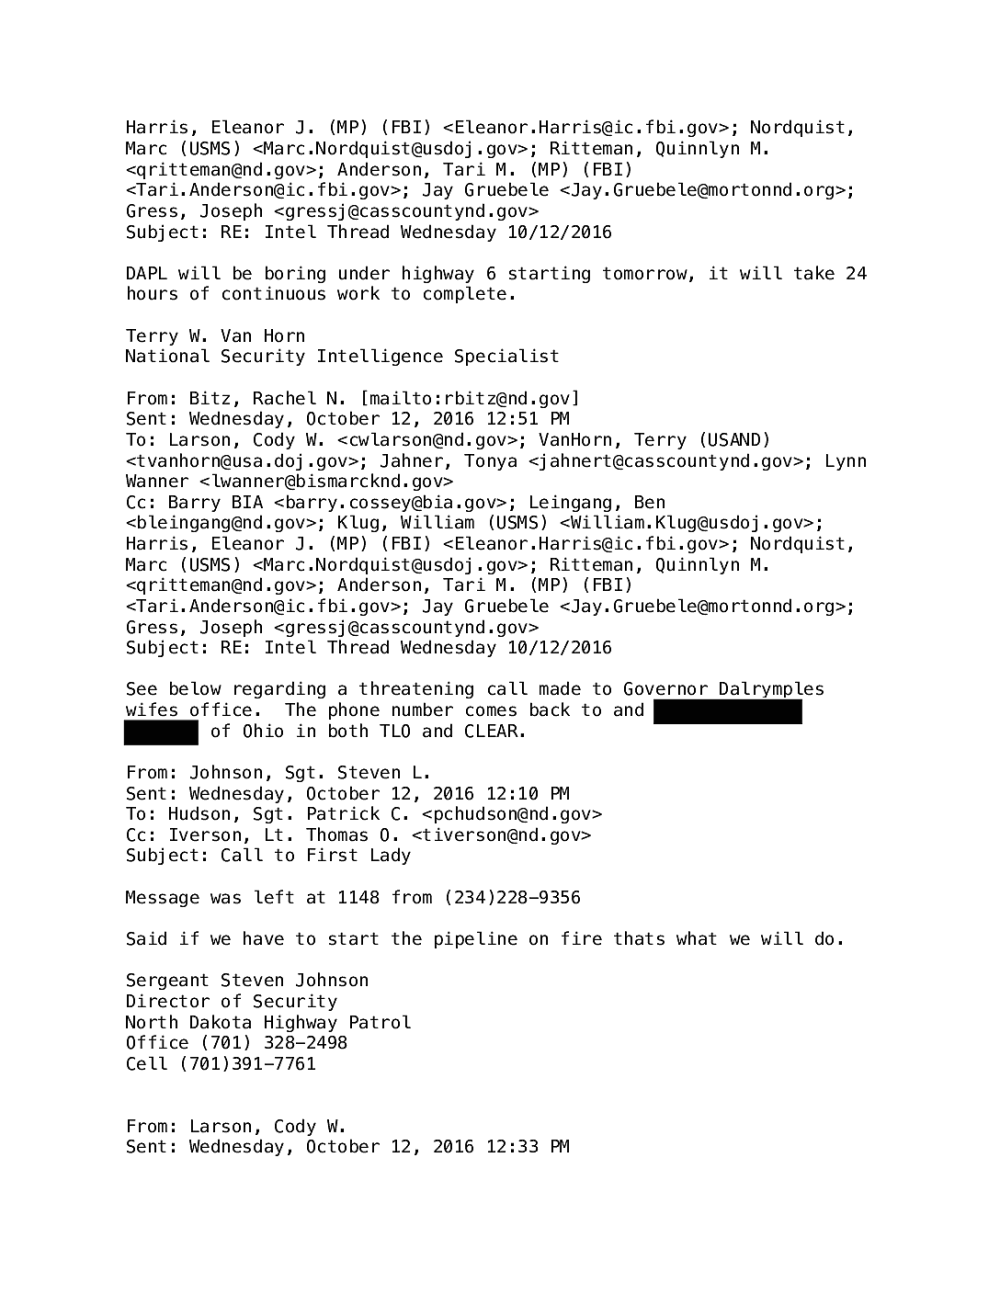 Page 7 from Intel Group Email Thread